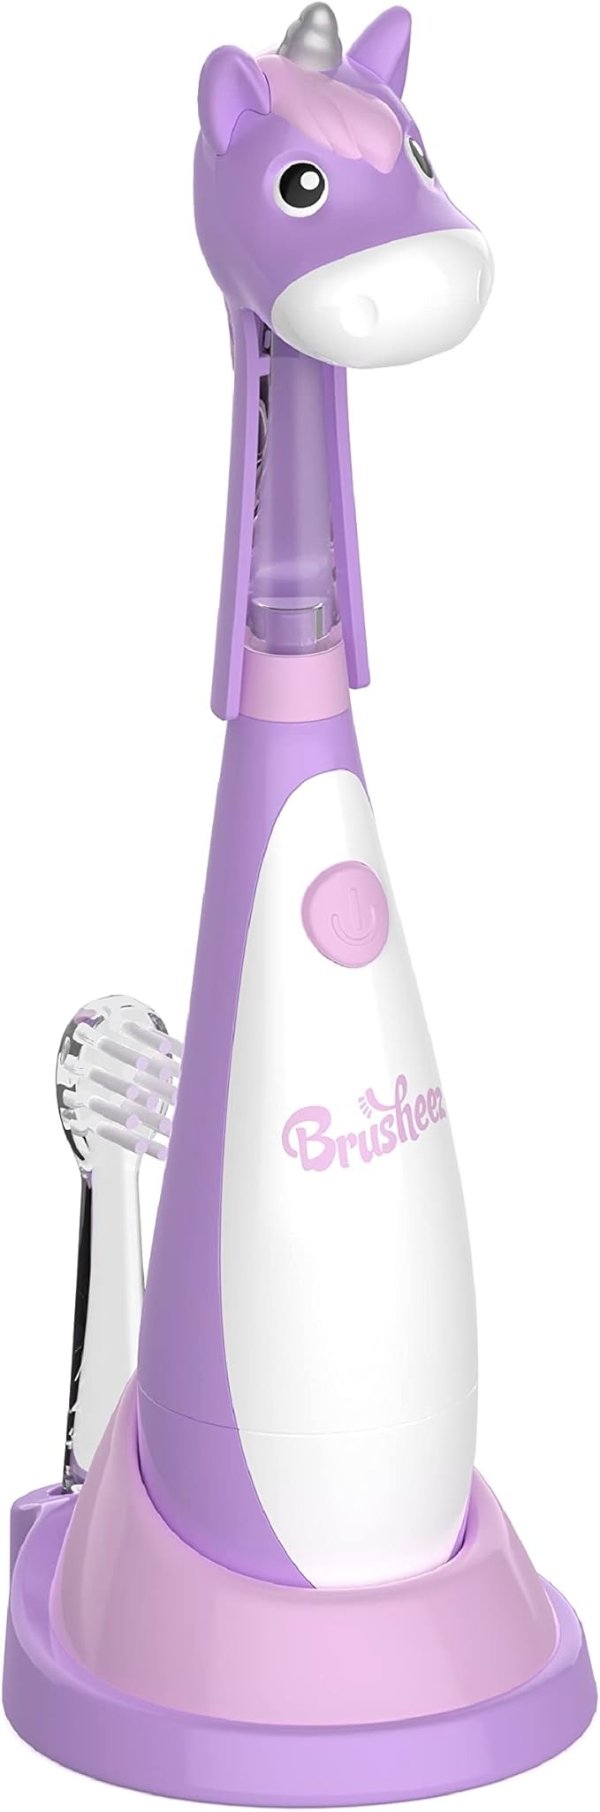 Little Toddlers Sonic Toothbrush - Safe & Gentle Toothbrush for Ages 1-3 with Built-in, Light-Up 2-Minute Timer, Extra Brush Head, & Storage Base for First-Time Brushers (Lucky The Unicorn)